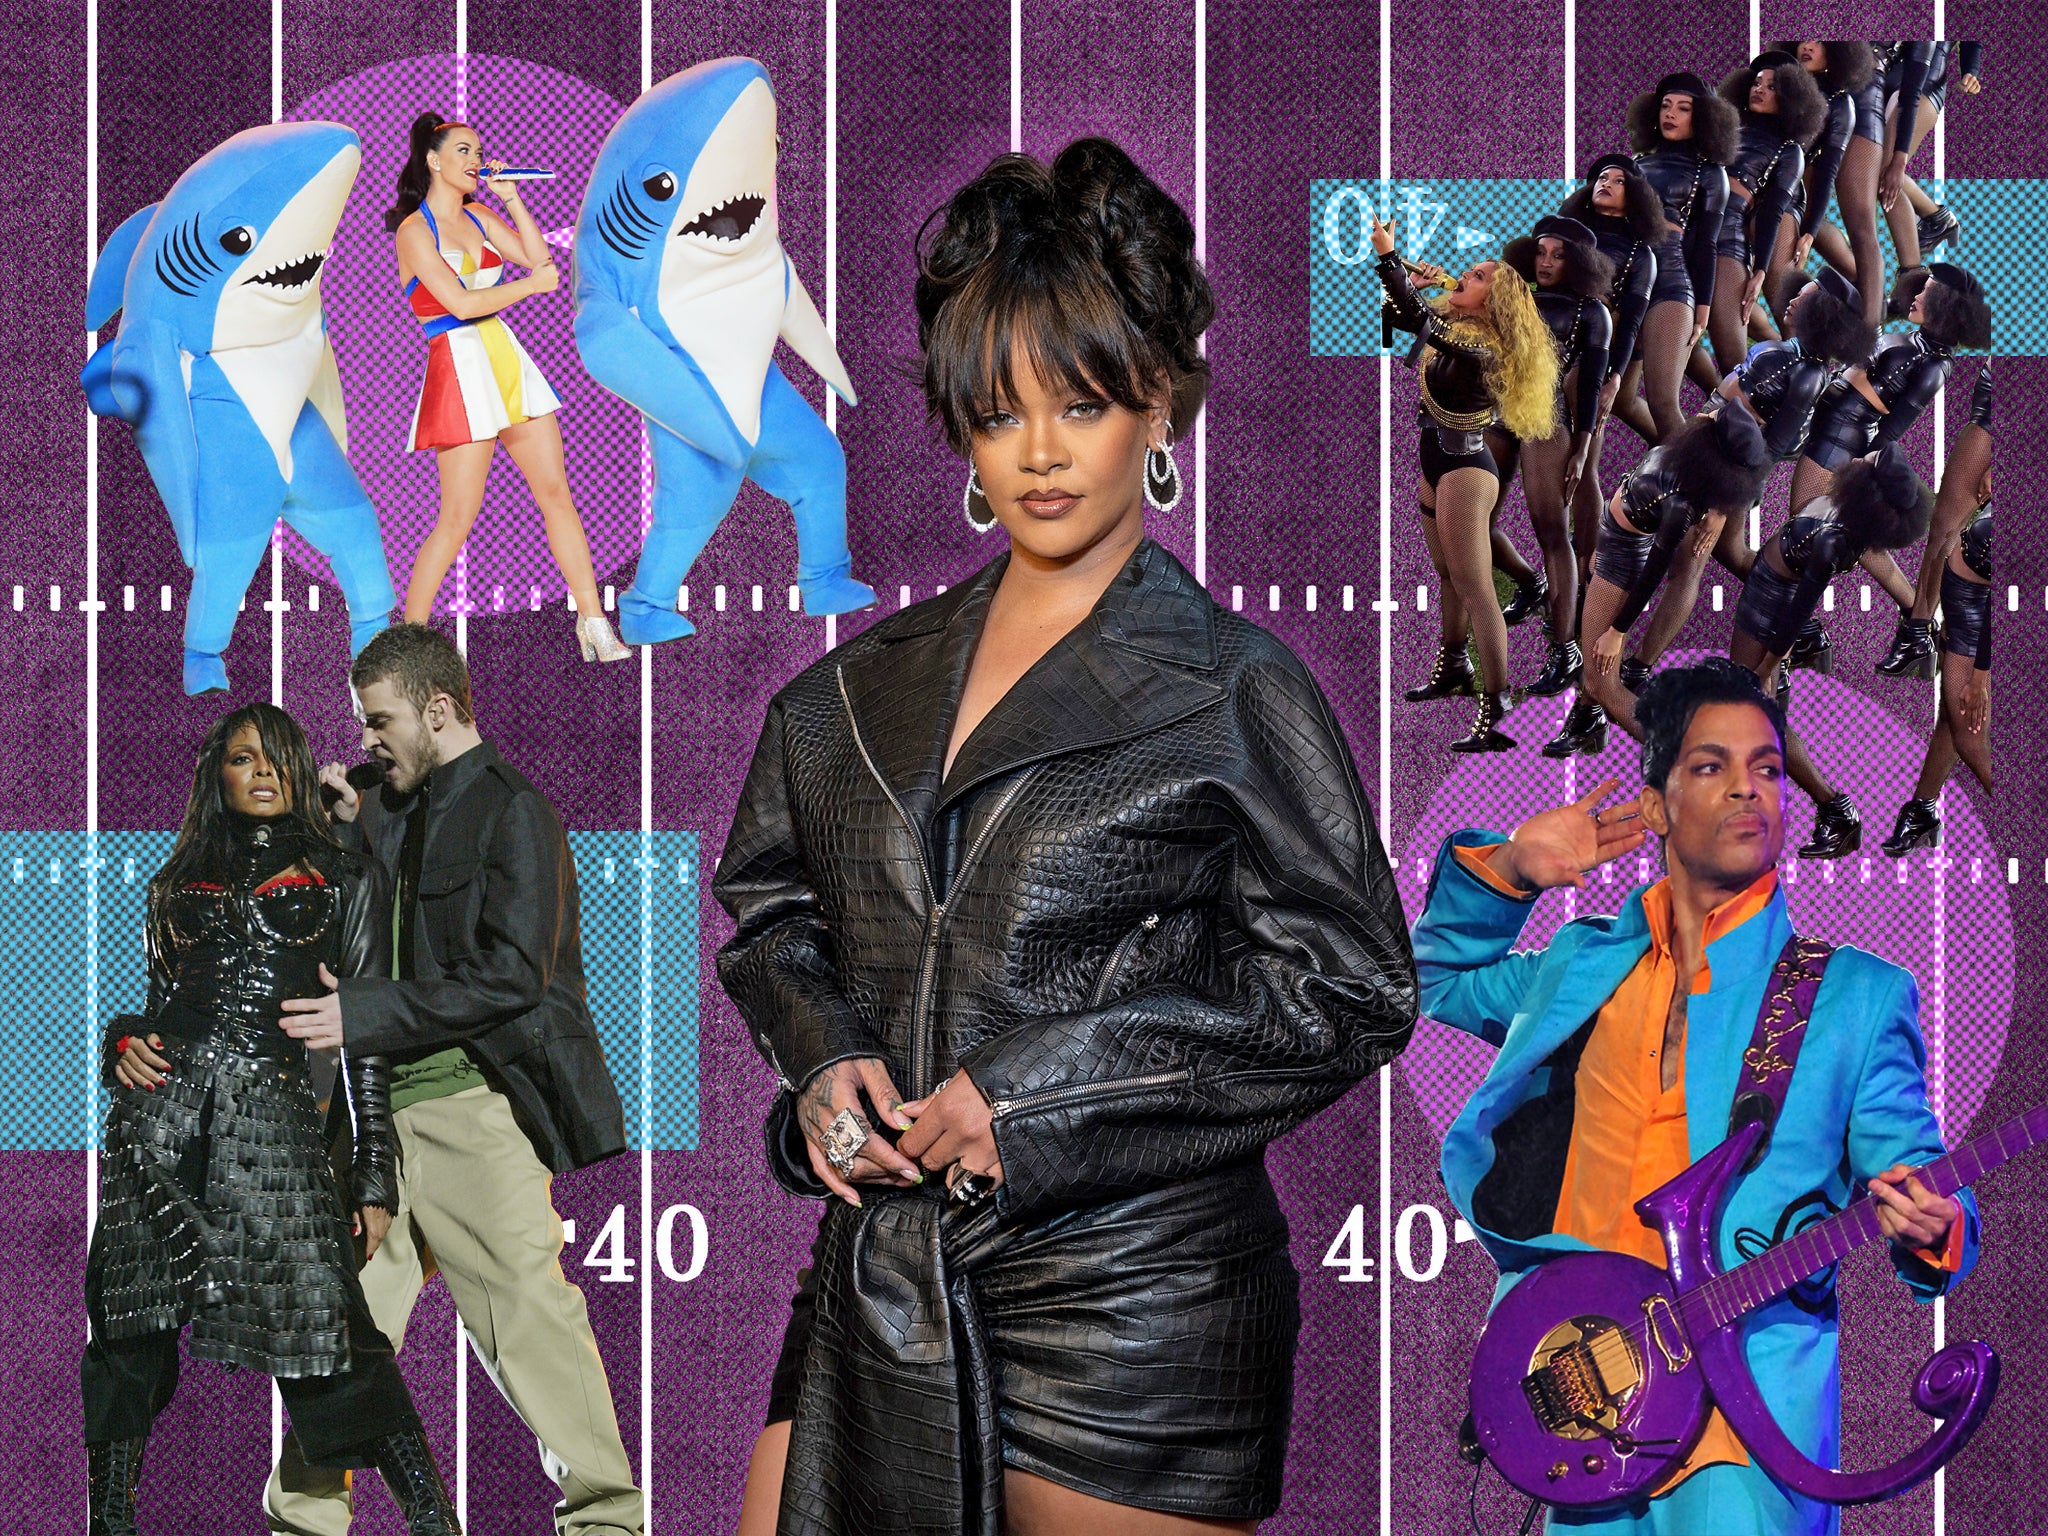 Having a ball: Rihanna will join the ranks of Super Bowl performers